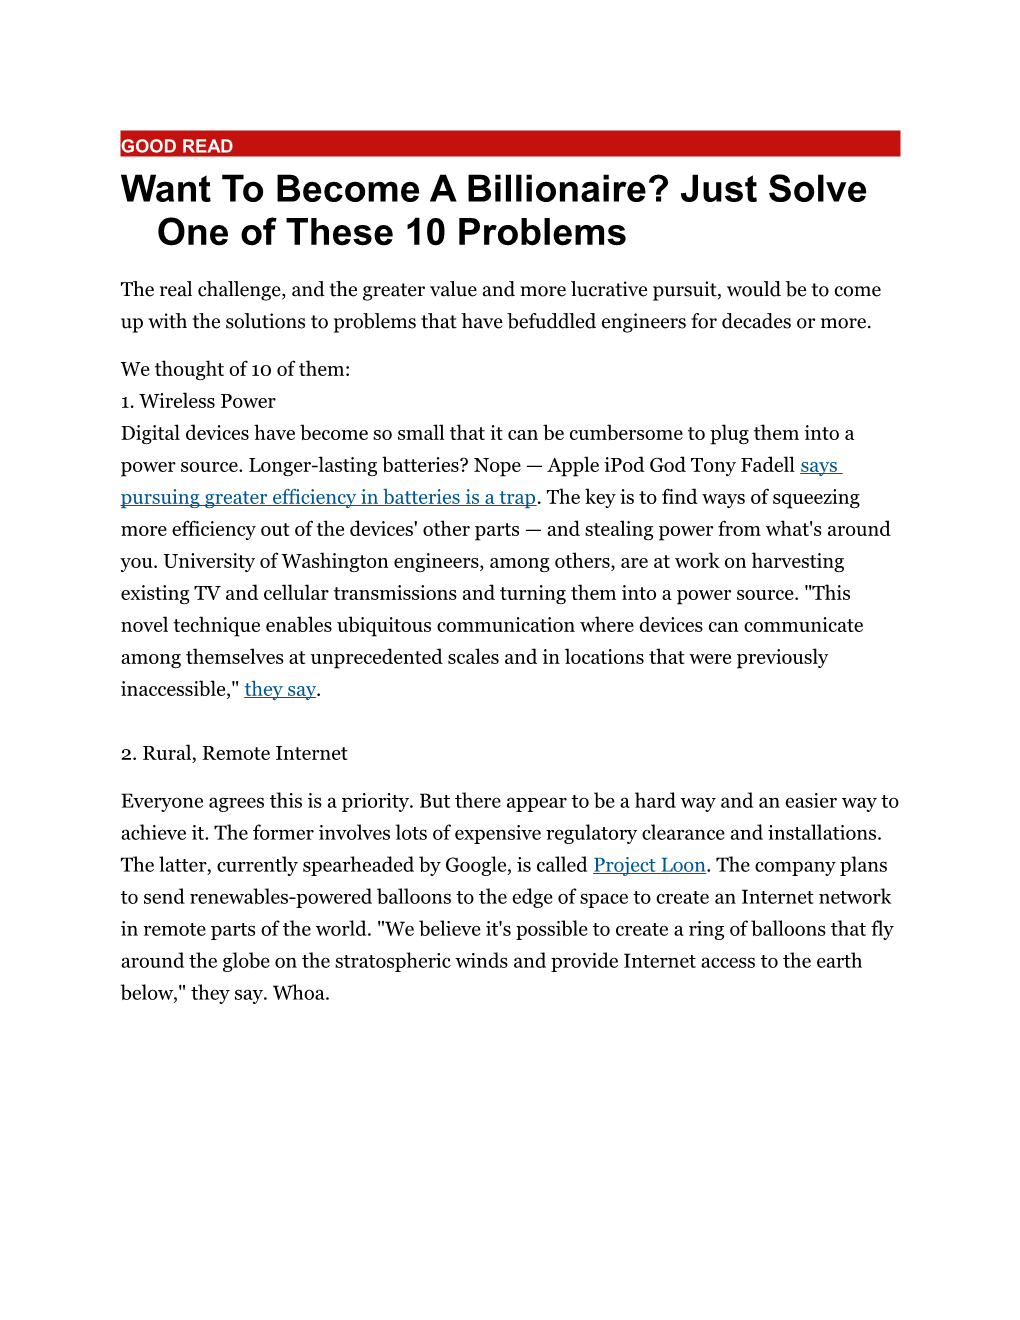 Want to Become a Billionaire? Just Solve One of These 10 Problems